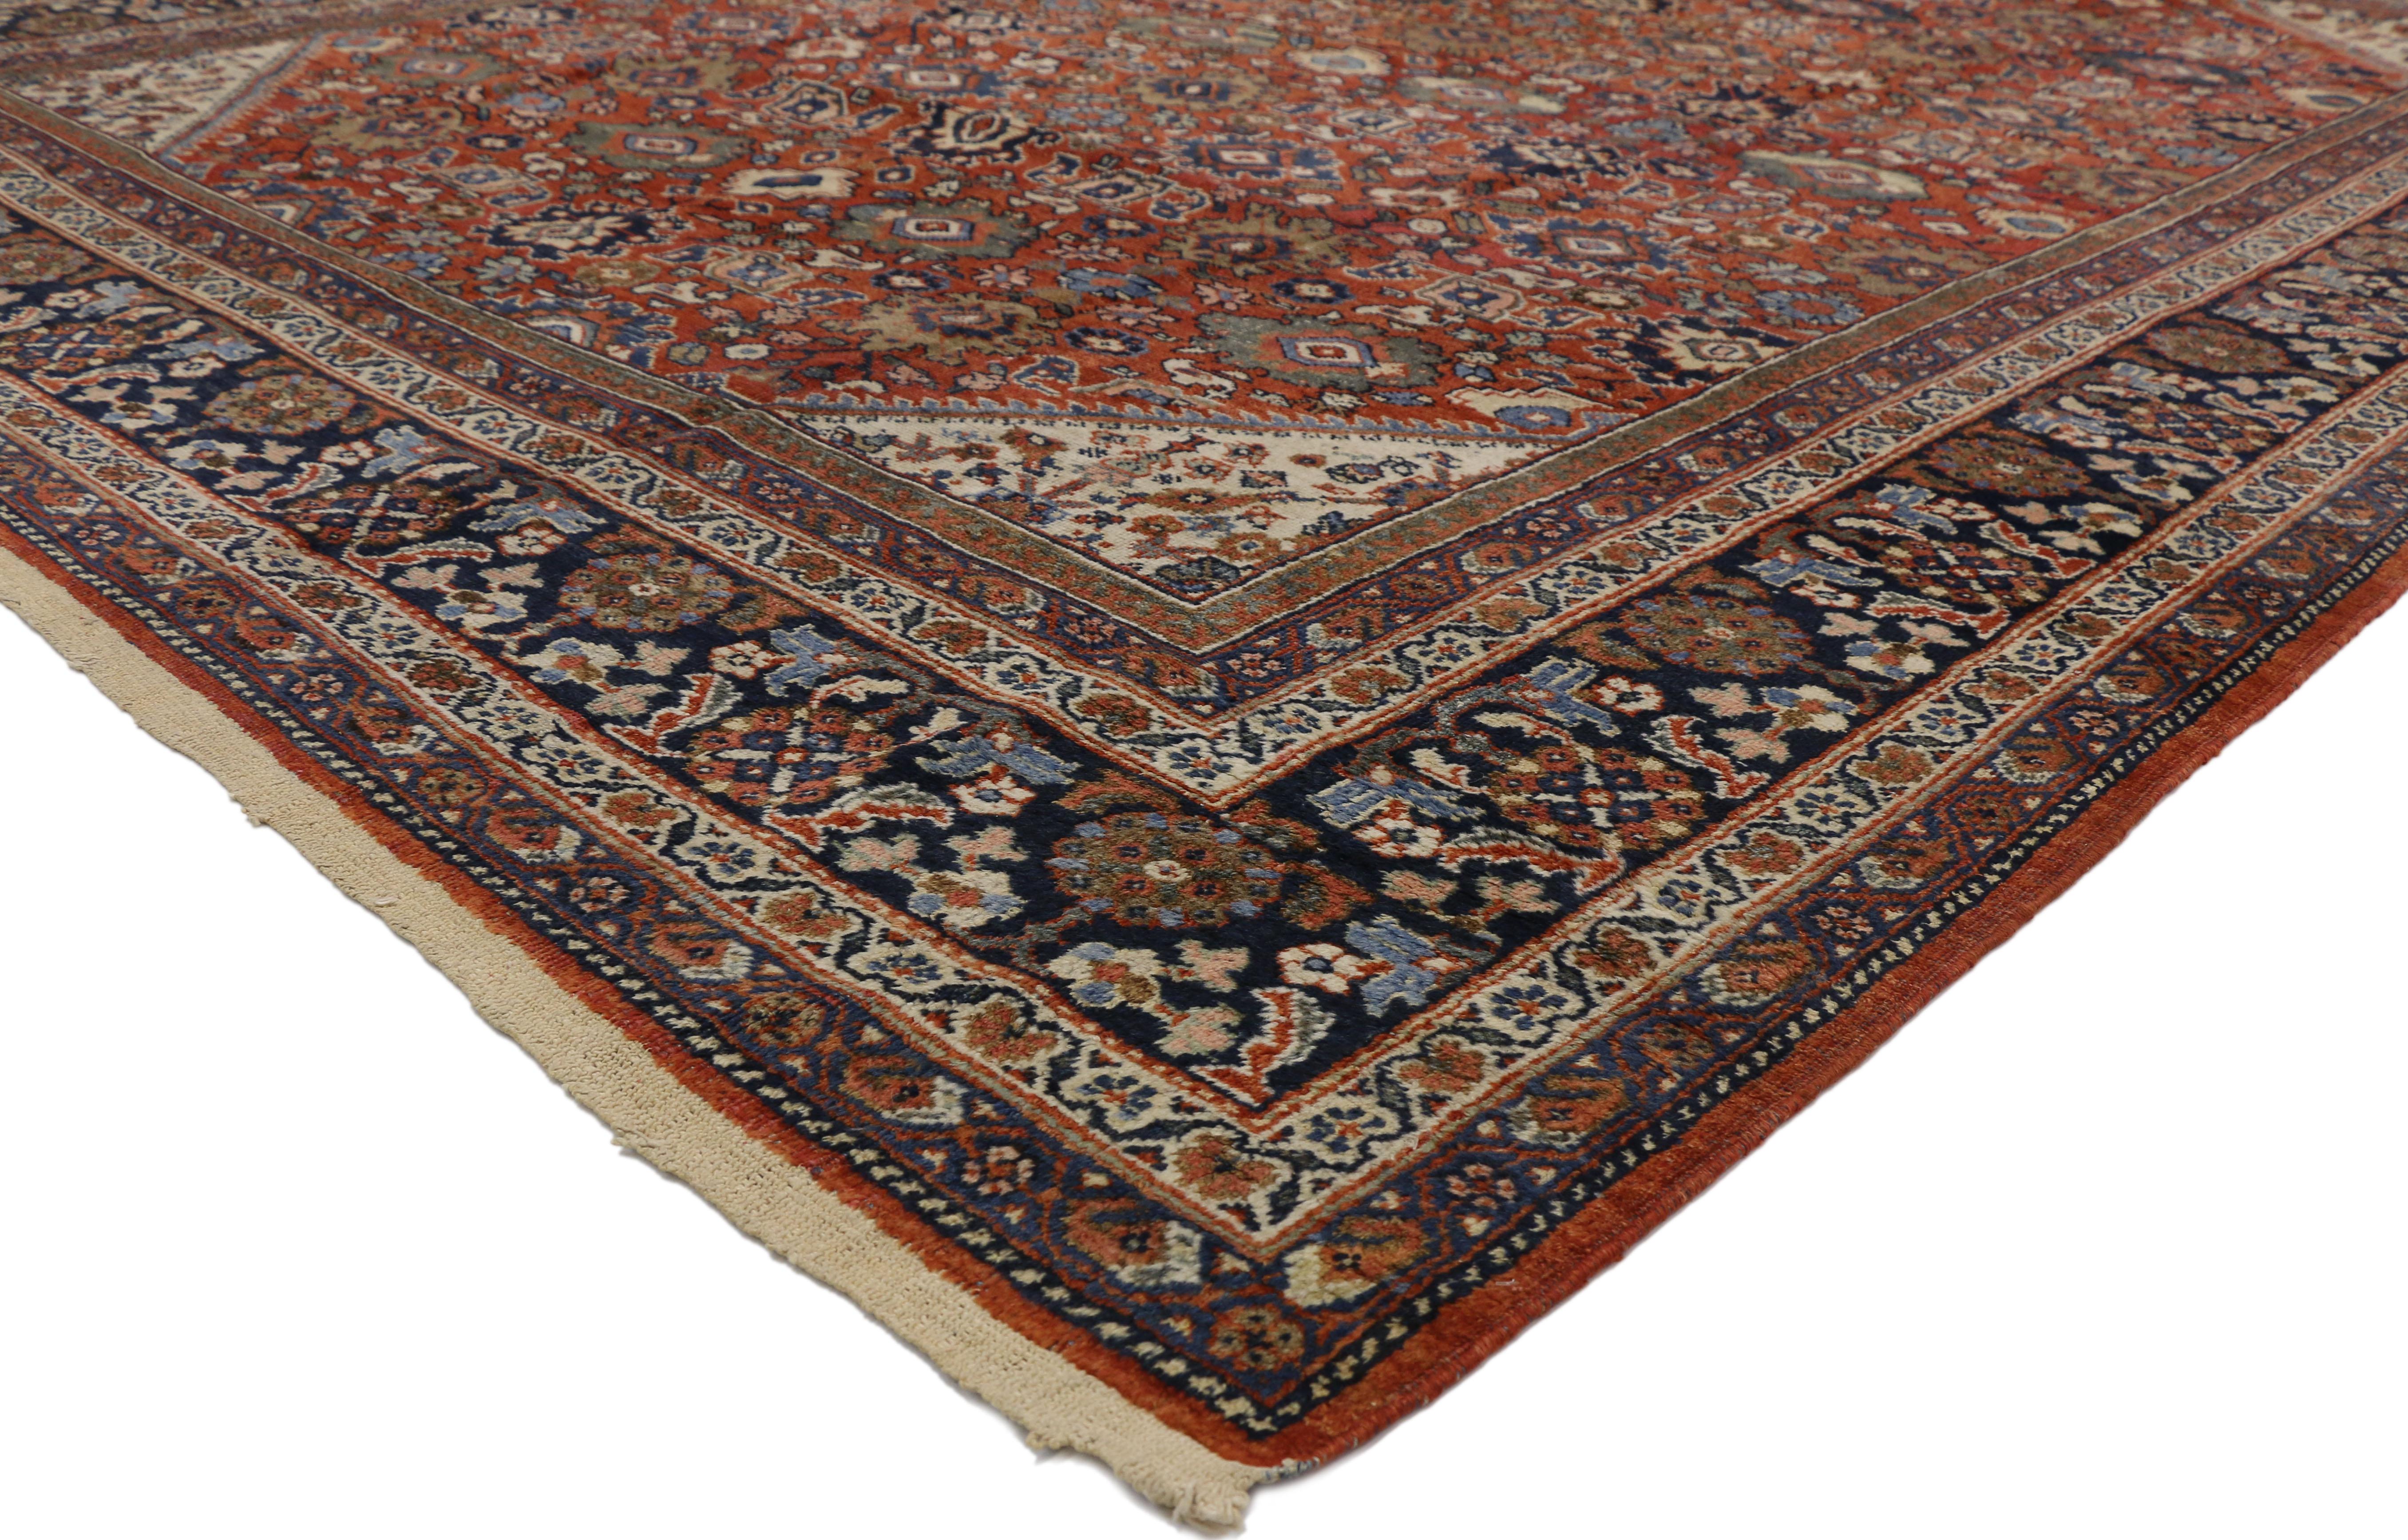 73333 Antique Persian Mahal Area Rug with Federal and American Colonial Style 09'03 X 12'00. Displaying intricate details and well-balanced symmetry, this hand knotted wool antique Persian Mahal rug beautifully embodies Federal and American Colonial